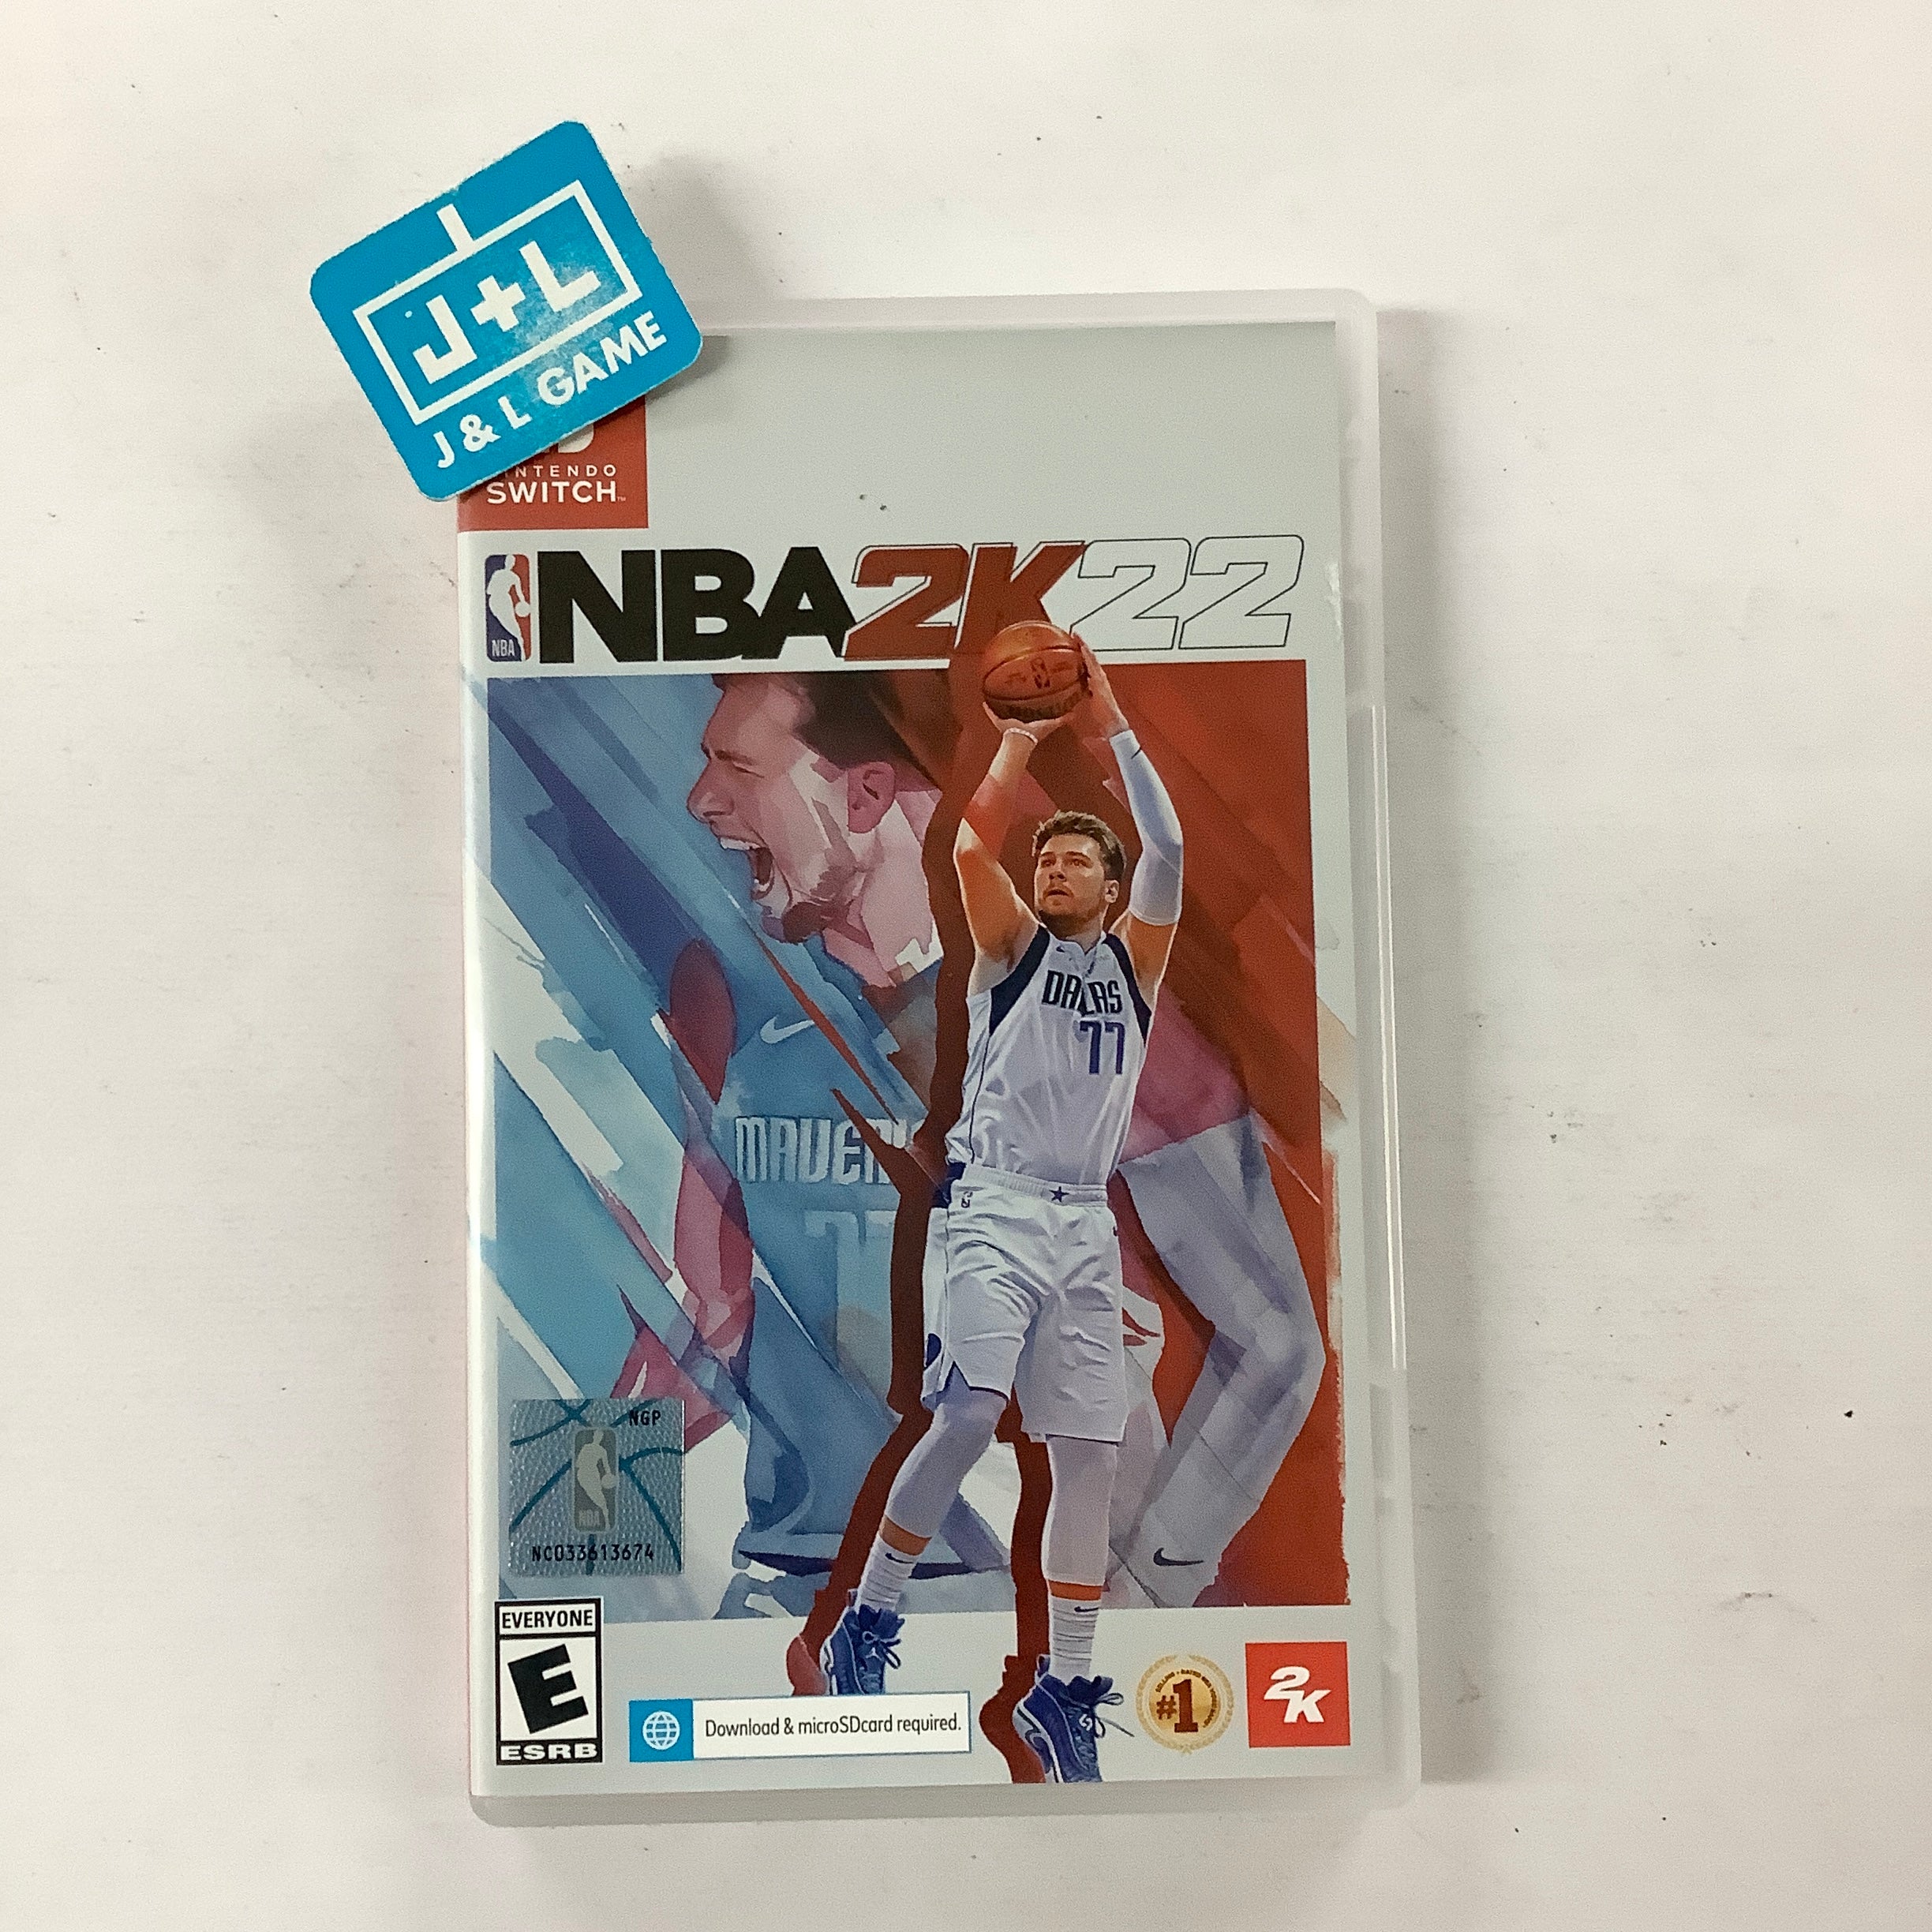 NBA 2K22 - (NSW) Nintendo Switch [Pre-Owned] Video Games 2K Games   